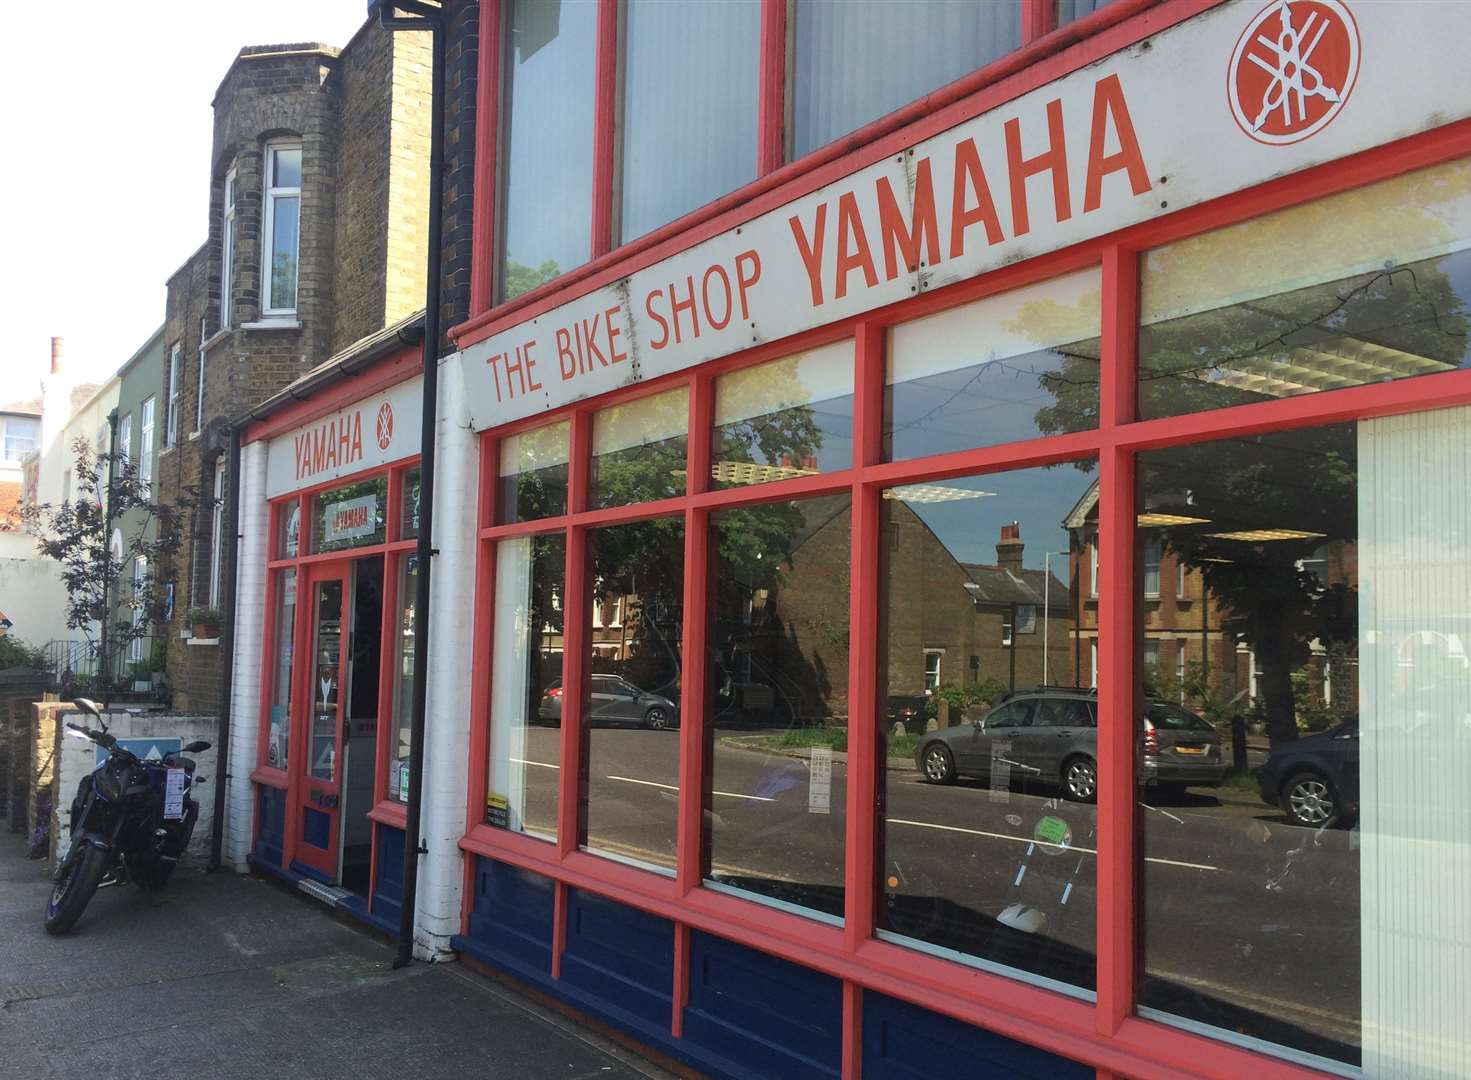 Shop to close after 40 years